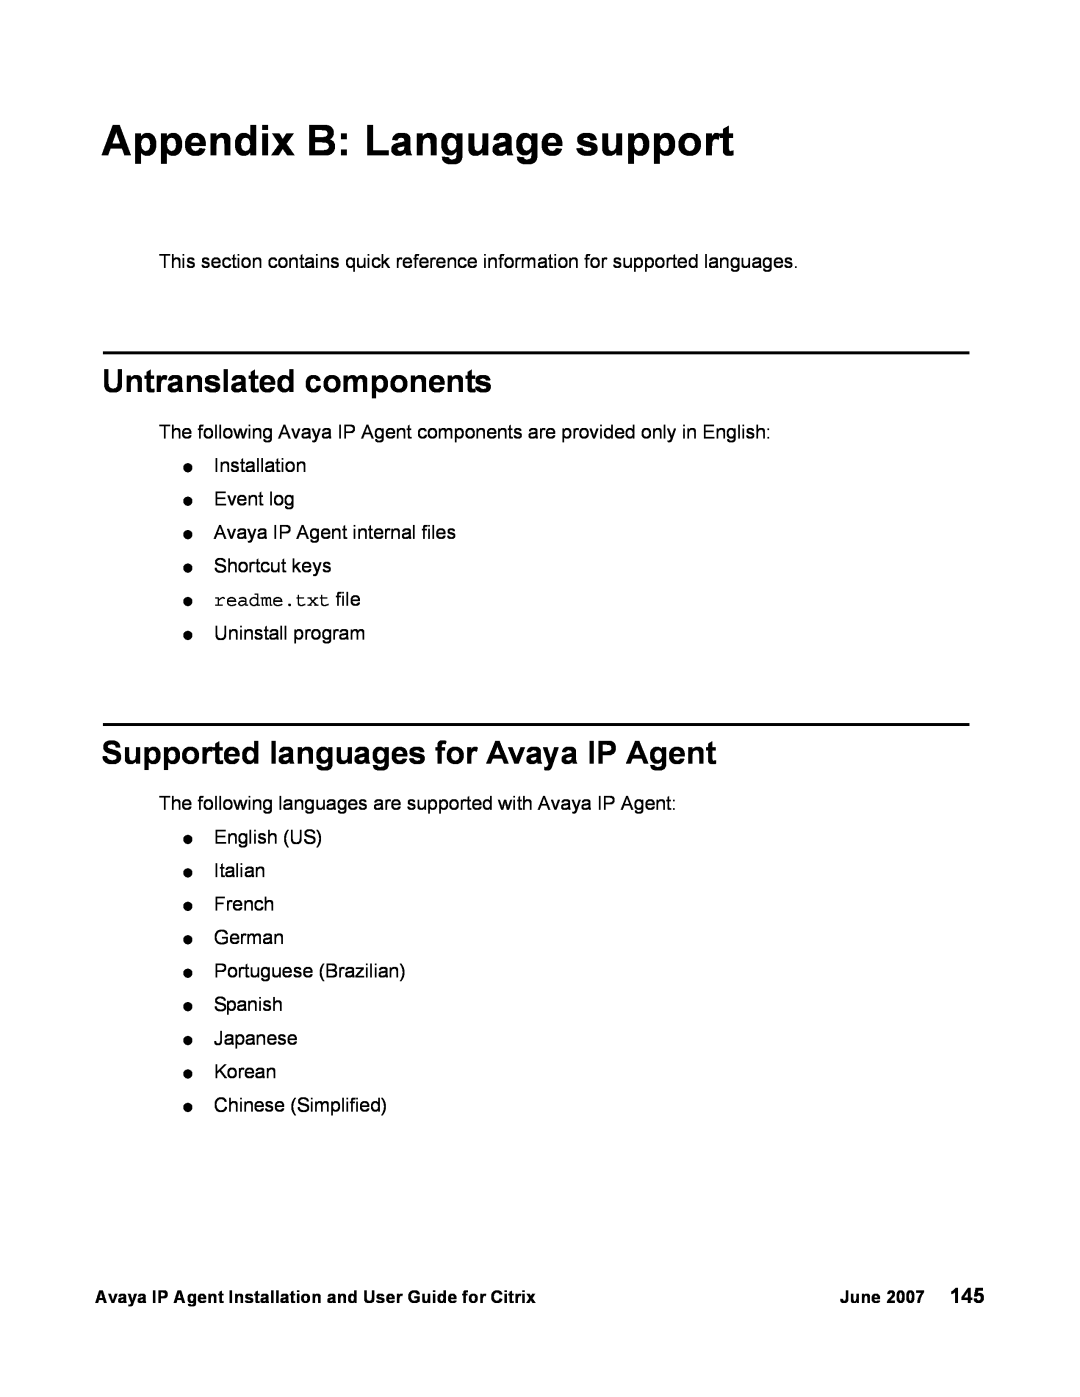 Avaya 7 manual Appendix B Language support, Untranslated components, Supported languages for Avaya IP Agent 